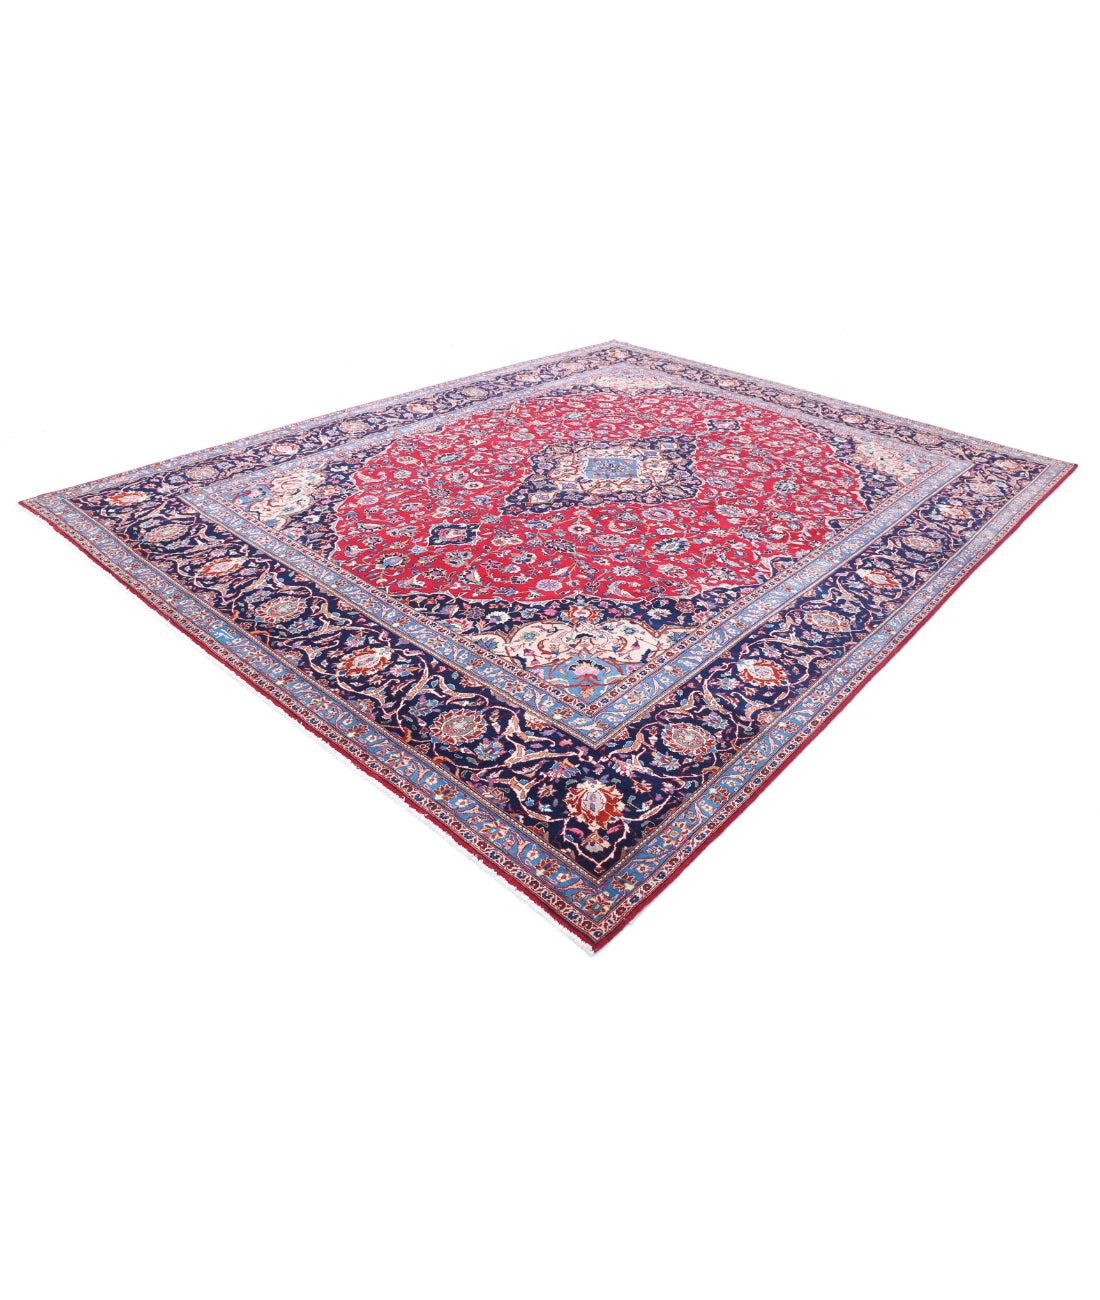 Hand Knotted Persian Mashad Wool Rug - 9'8'' x 12'6'' 9'8'' x 12'6'' (290 X 375) / Red / Black